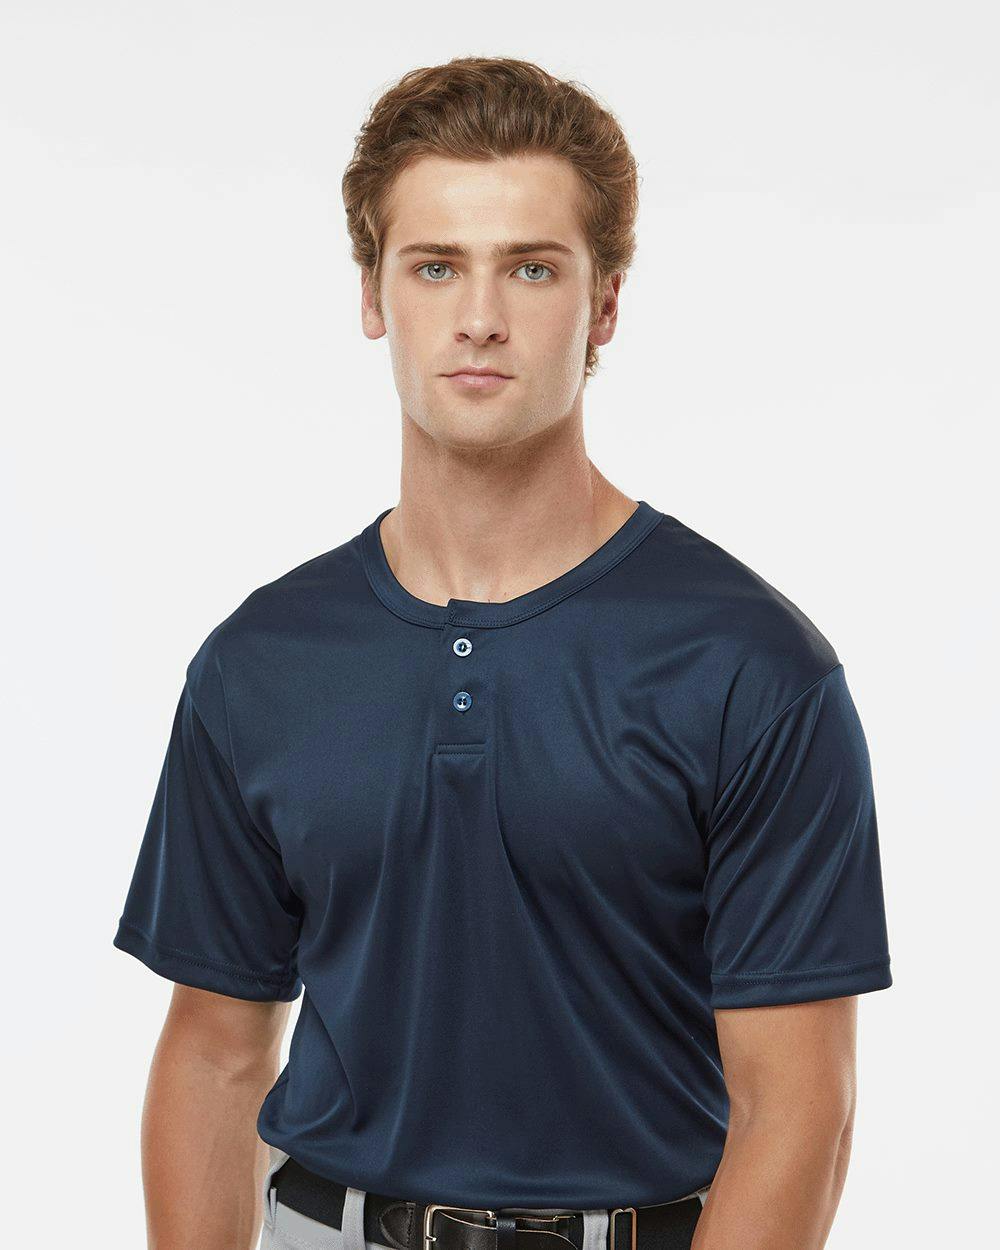 Image for B-Core Placket Jersey - 7930